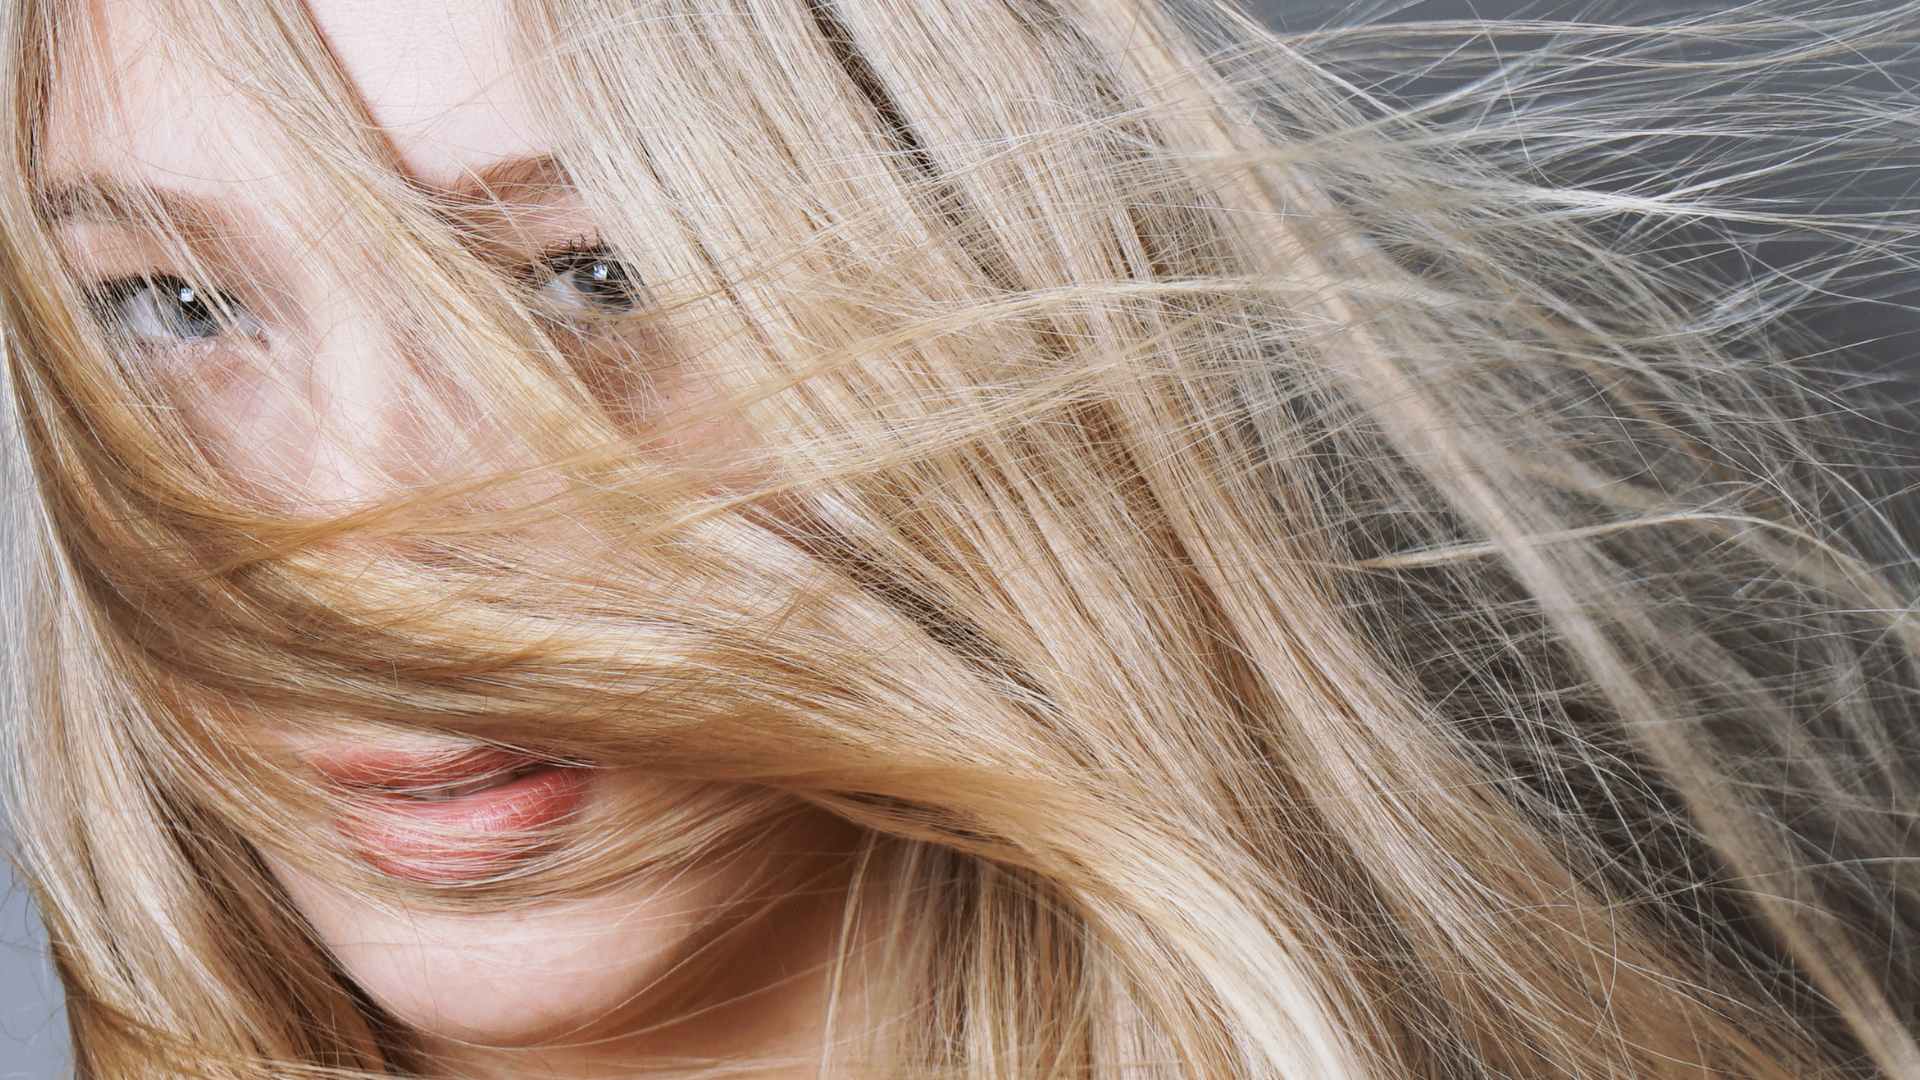 female with long blonde hair and split ends. Hair over her face.